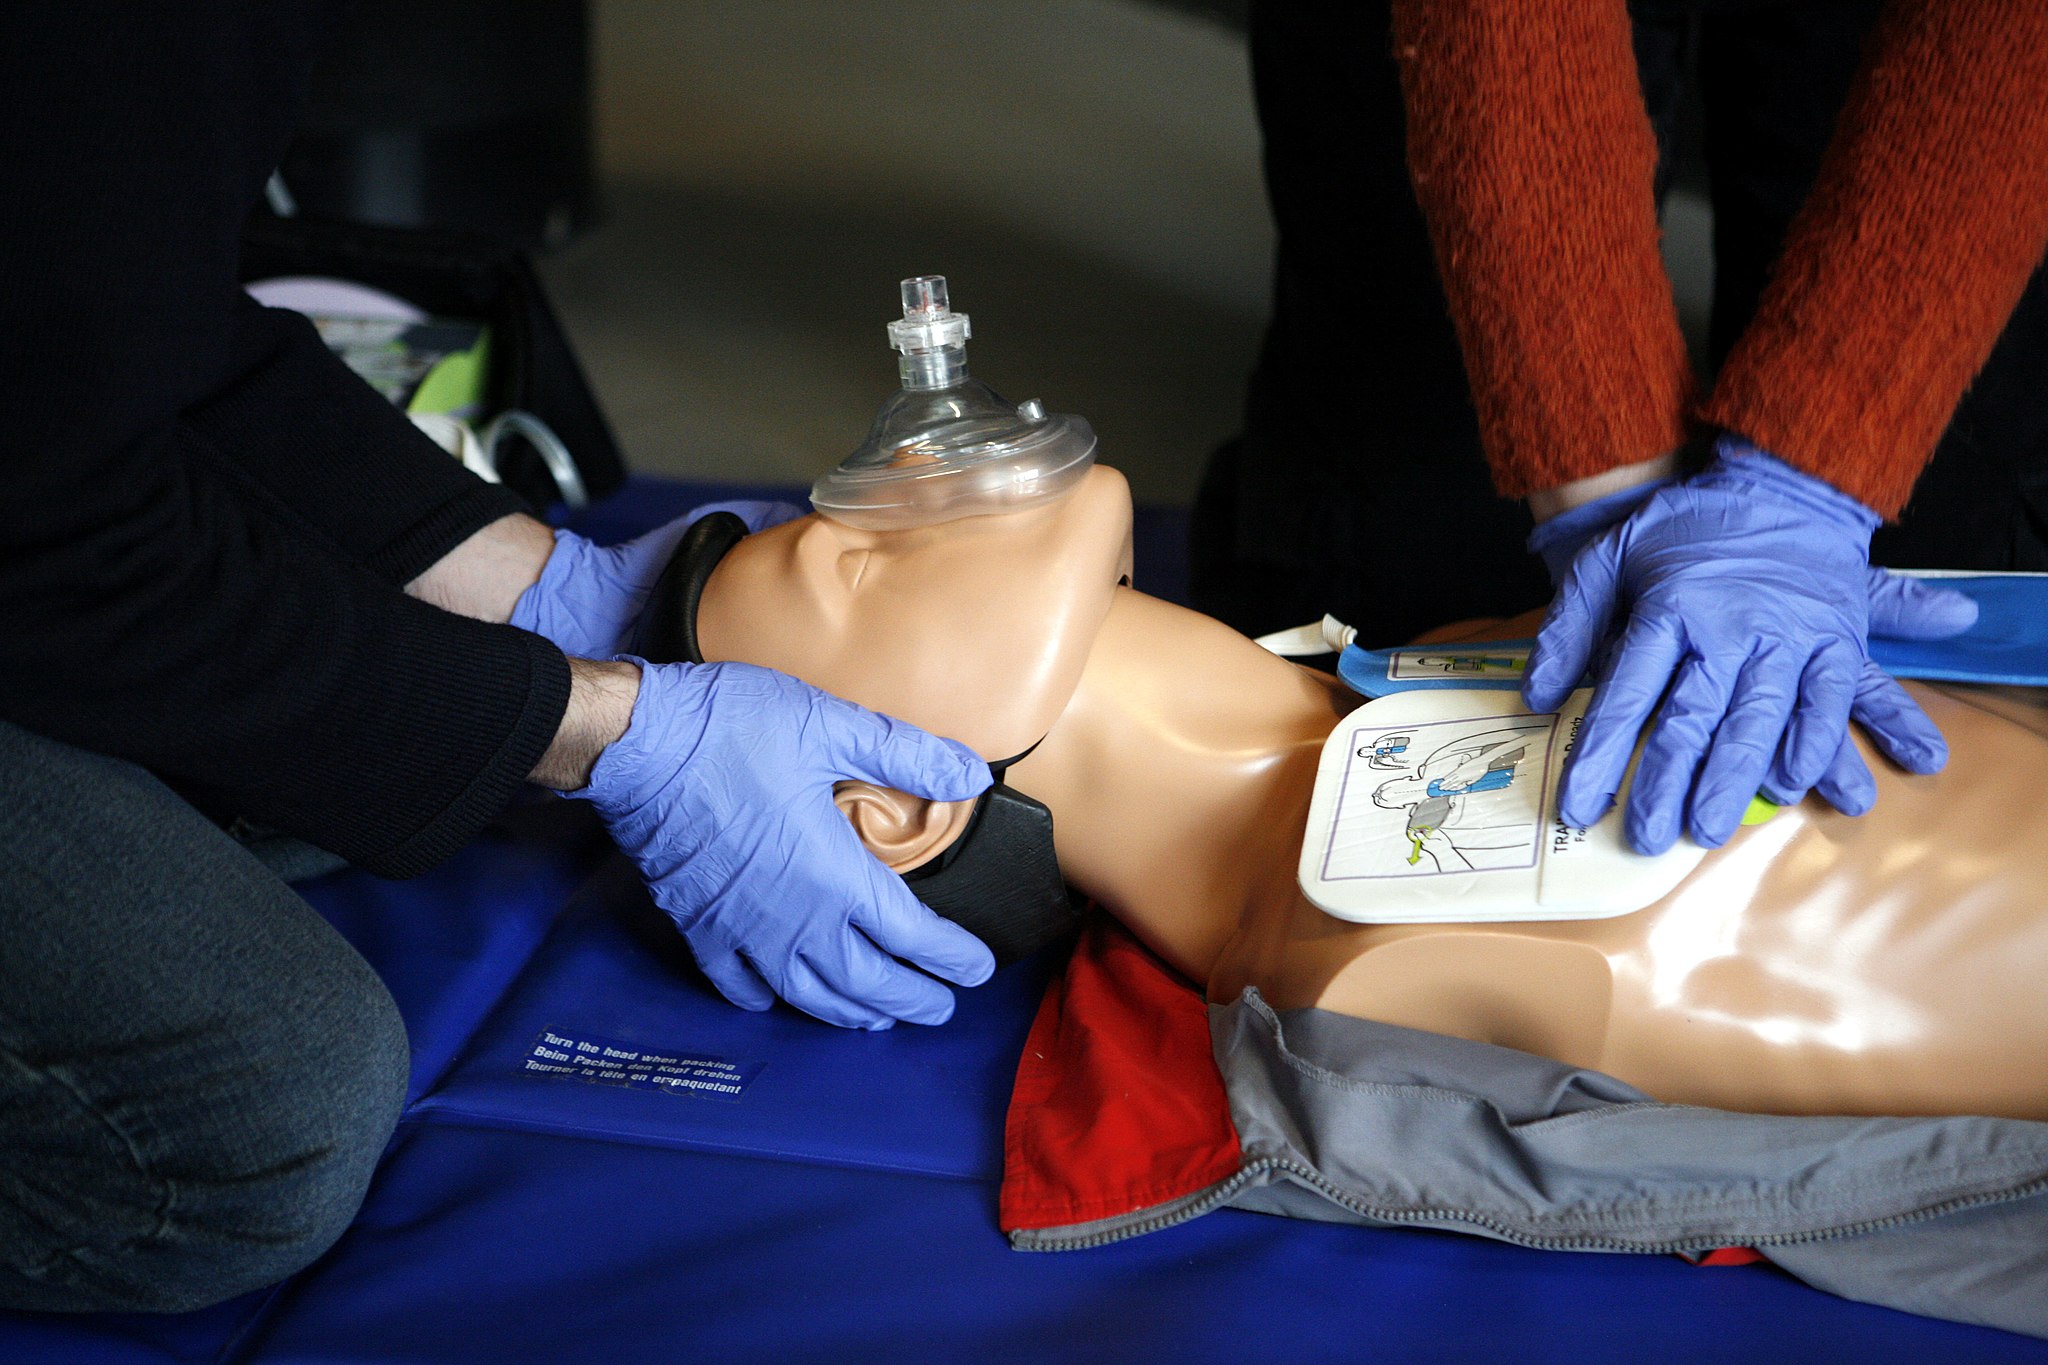 two sets of hands in medical gloves, one stabilizing the head of a cpr mannequin, the other doing chest compressions